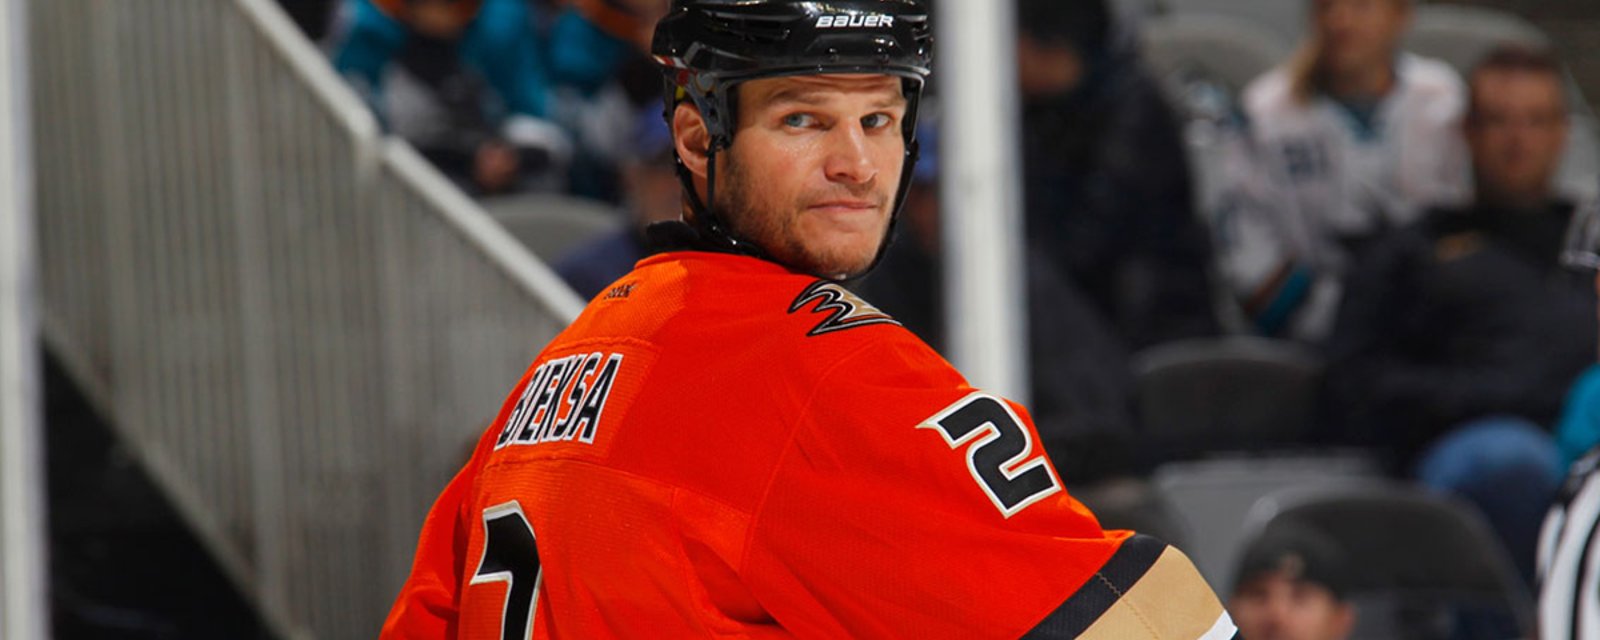 Fan reaches out to Ducks’ Bieksa with tragic, but uplifting story